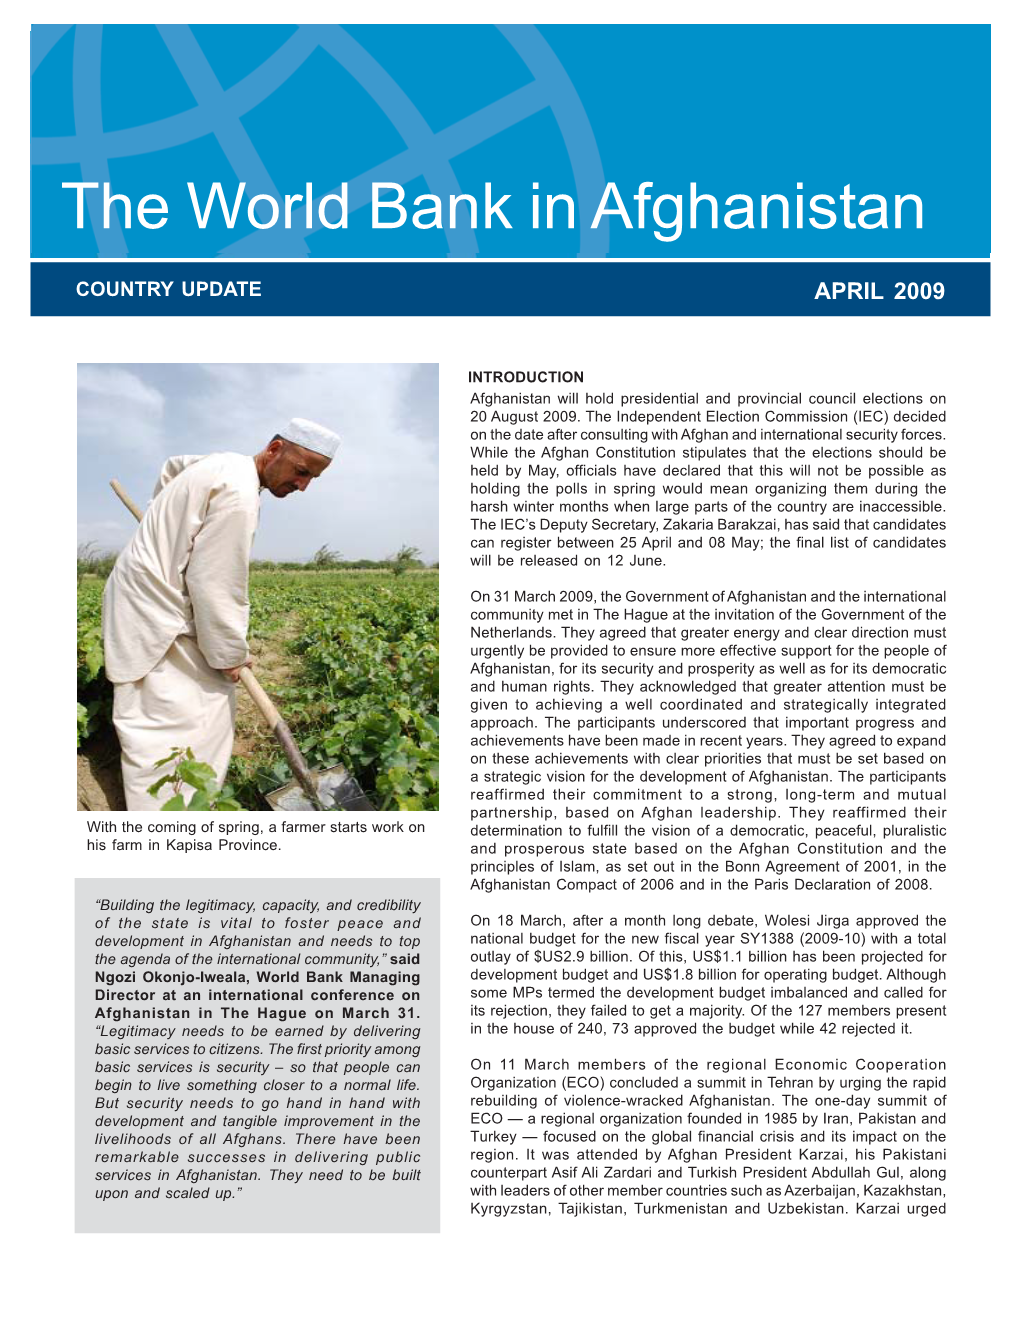 The World Bank in Afghanistan